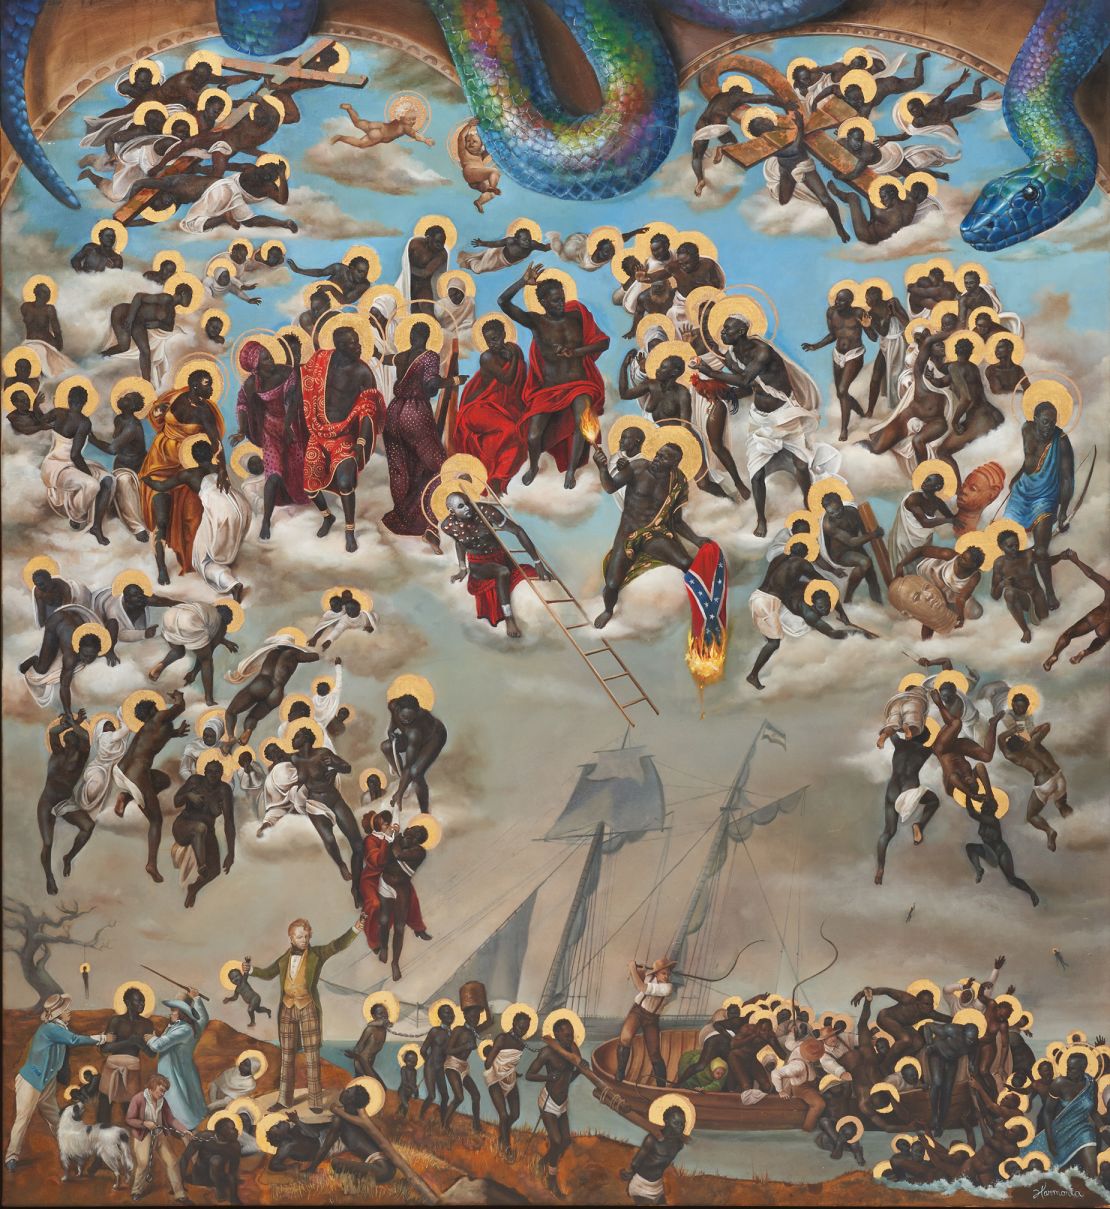 “I just switched it out to the burning of the flag because I wanted to have more of a positive — that this flag, that was putting us in a box and telling us what to do and what to believe in, is now being destroyed,” Rosales explained of her painting "The Last Judgment."